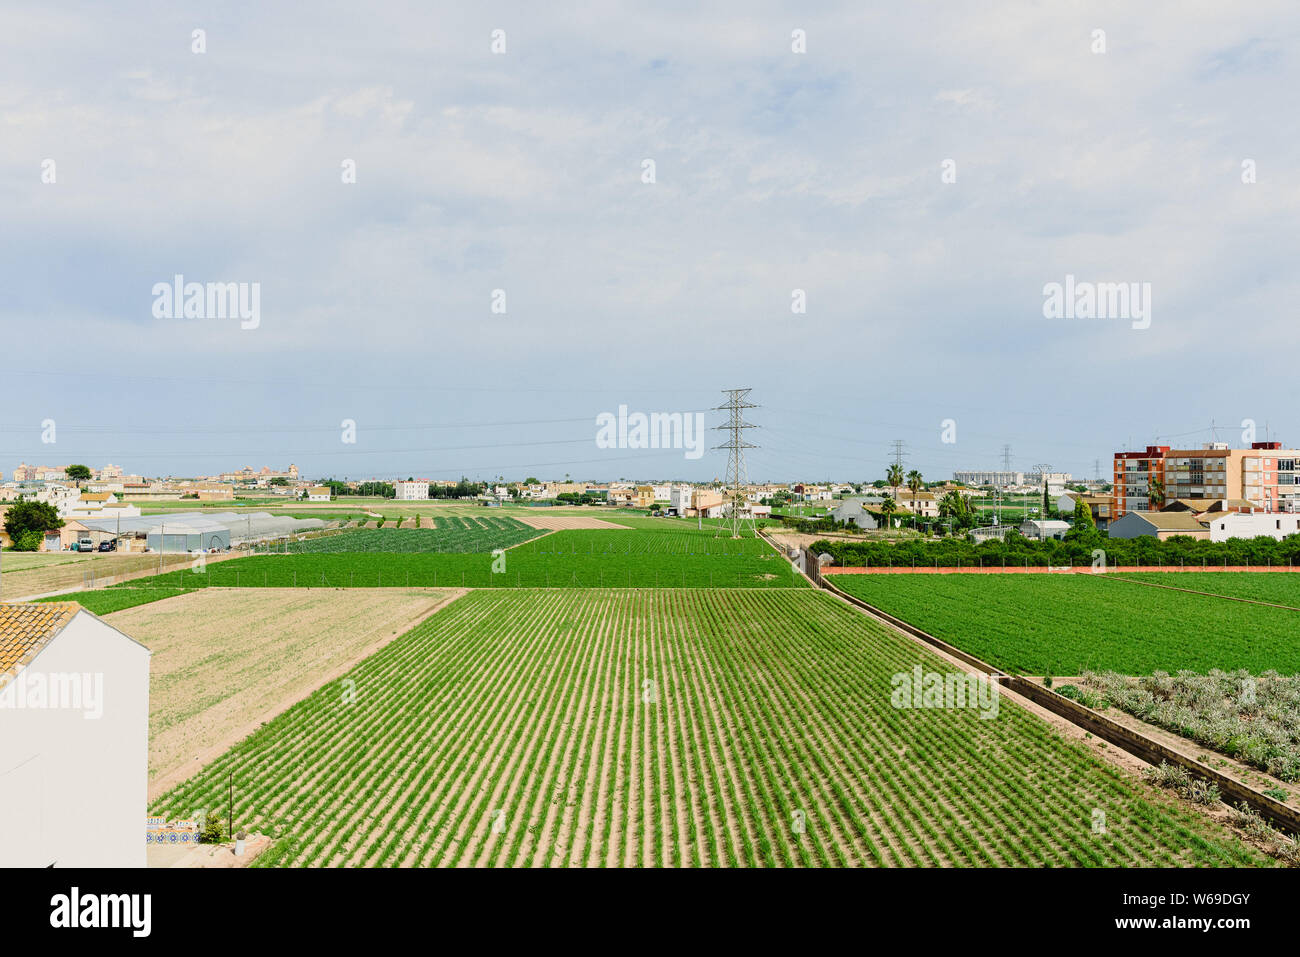 Valencia, Spain - June 9, 2018: Plantation of tigernuts in the Valencian orchard, near the houses of the city. Stock Photo